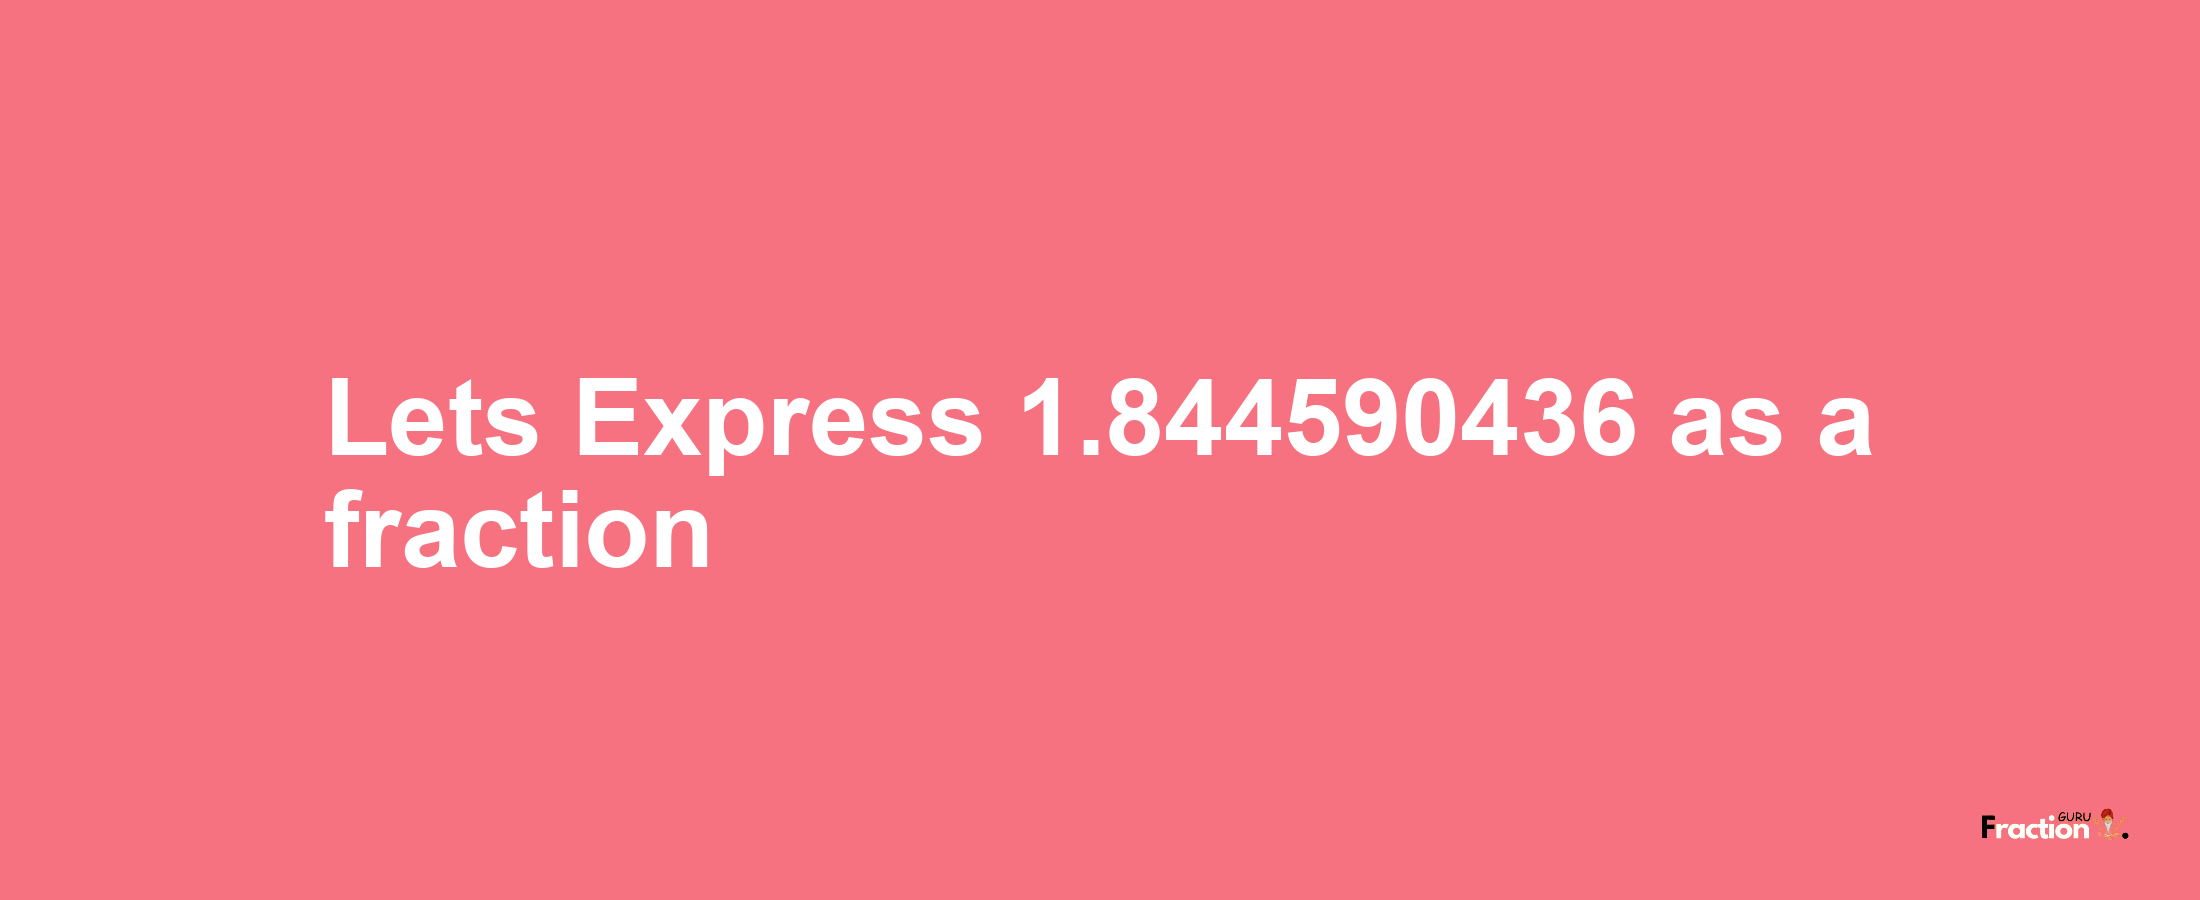 Lets Express 1.844590436 as afraction